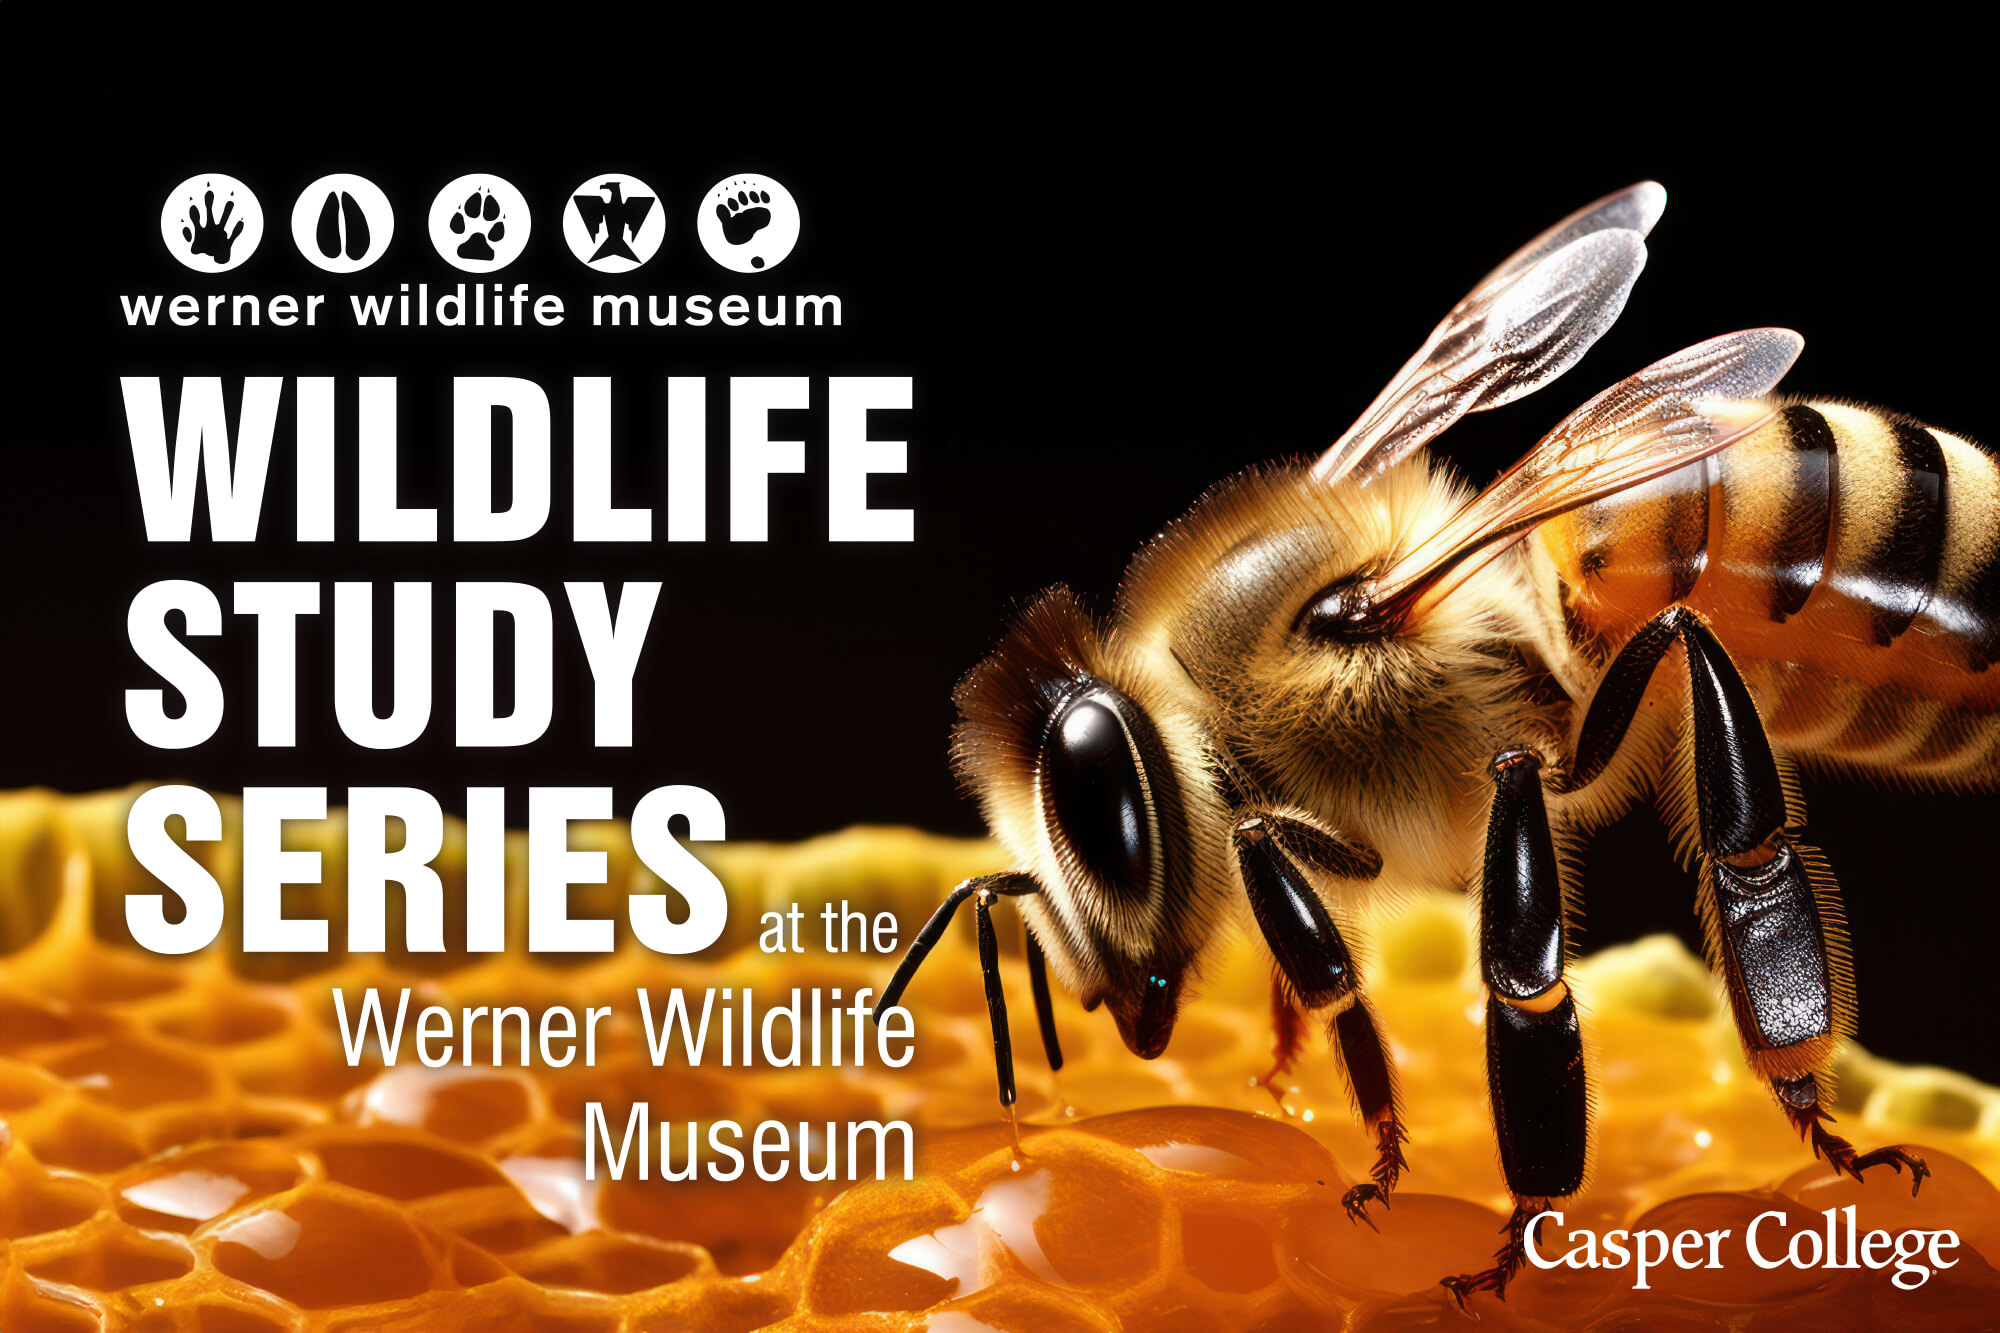 Image for May, June, and July Werner Wildlife Series press releases.